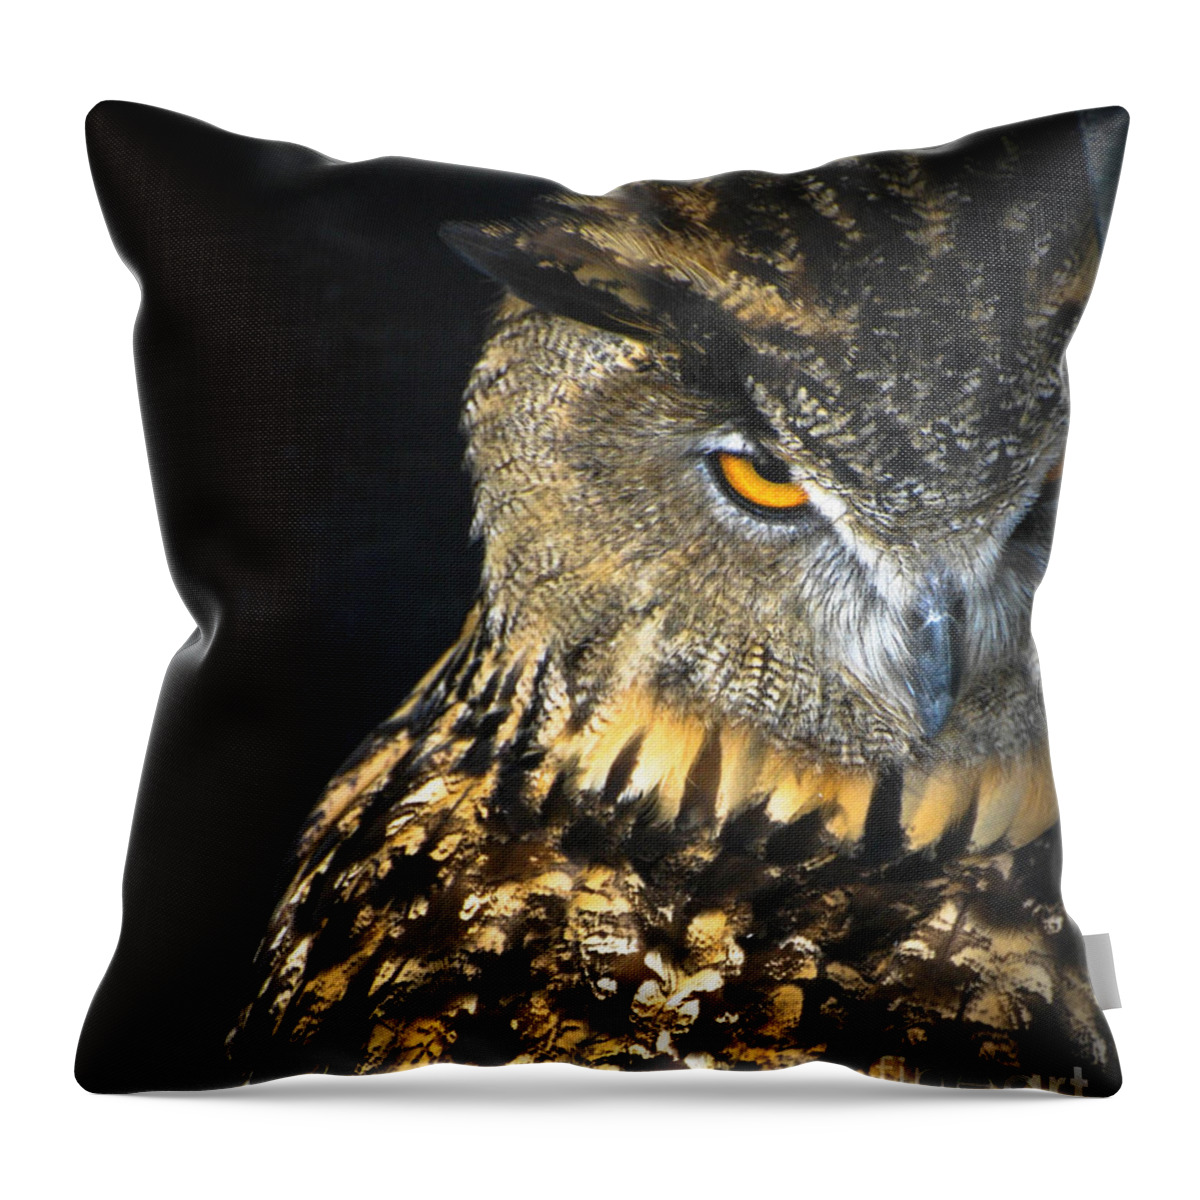 Owl Throw Pillow featuring the photograph The Look by Amy Porter